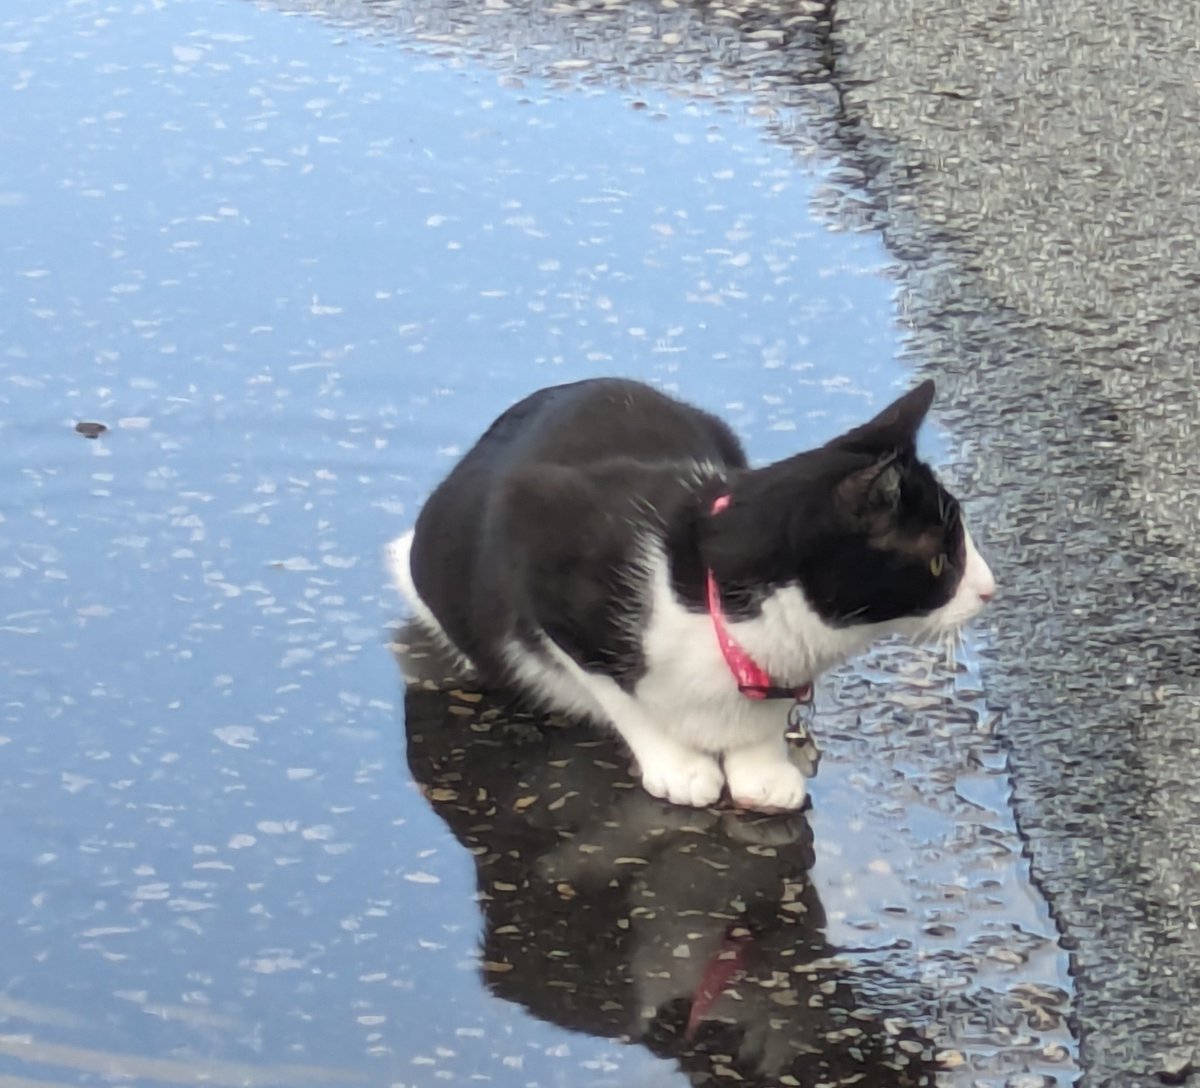 He's sitting in a puddle. Behind the camera I'm staring at him in disbelief 🙀 I did not teach him this!